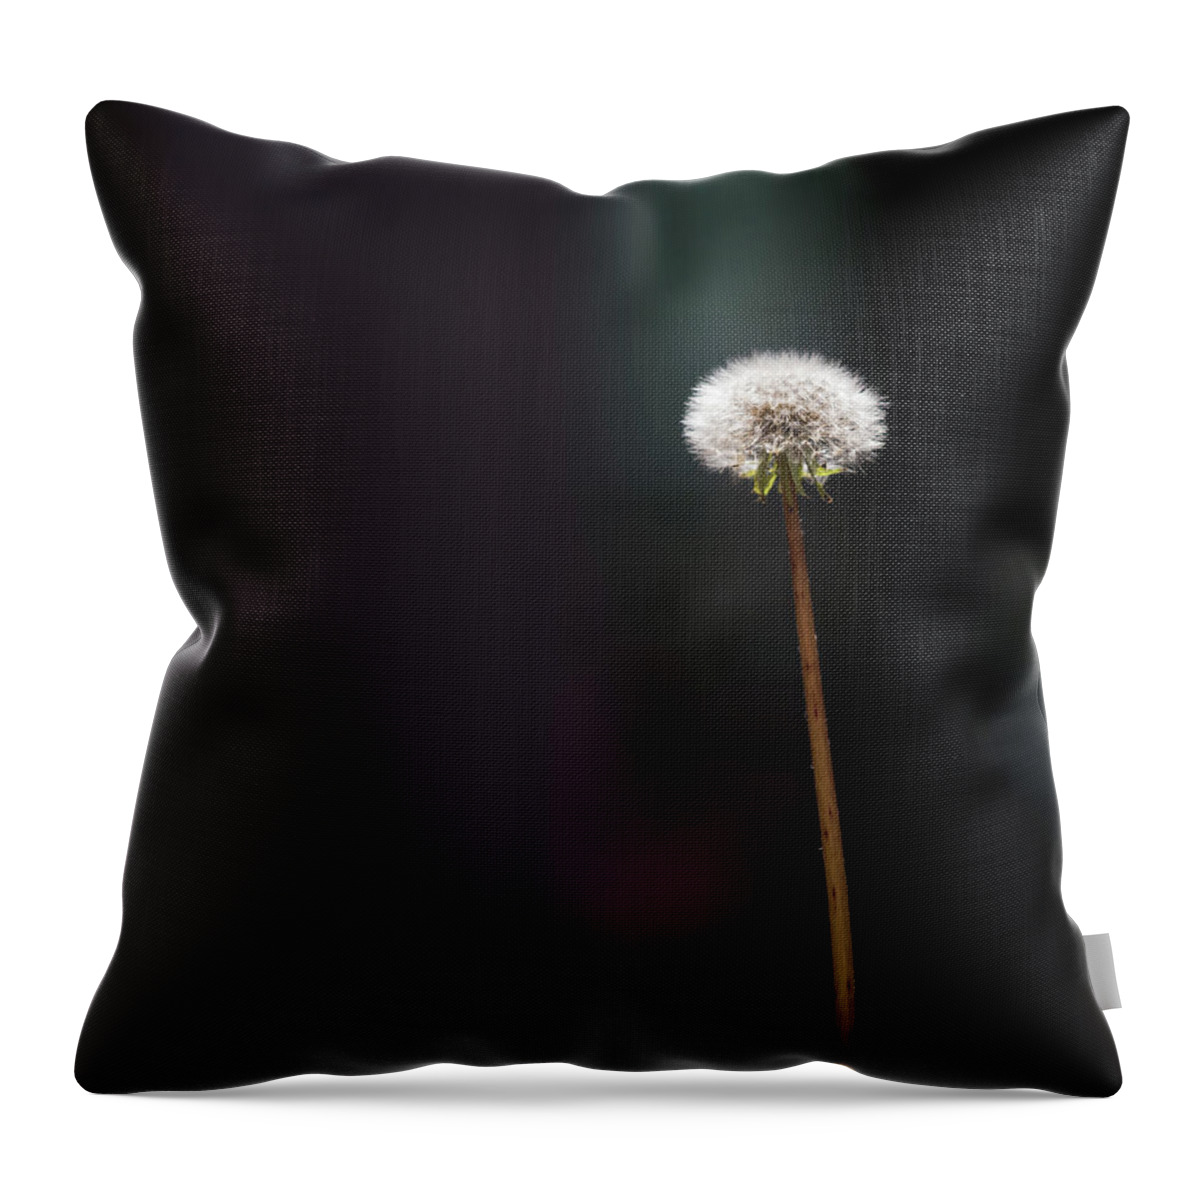 Dandelion Throw Pillow featuring the photograph Never Stop Wishing by Cynthia Wolfe